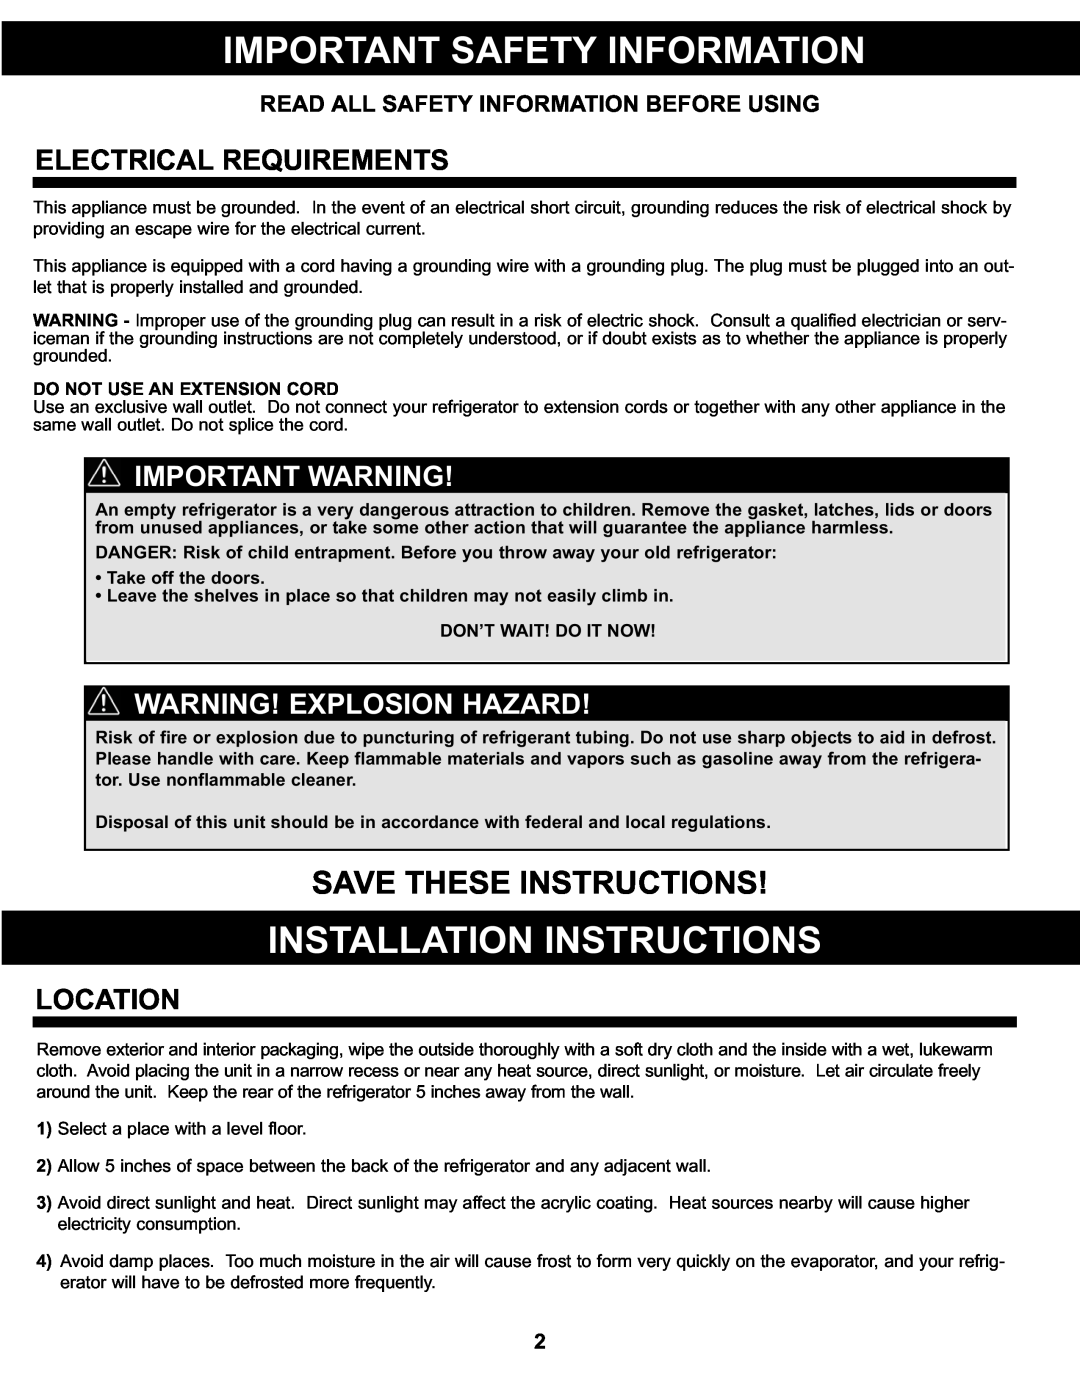 Danby DCR044A2BDD Important Safety Information, Installation Instructions, Save These Instructions, Important Warning 